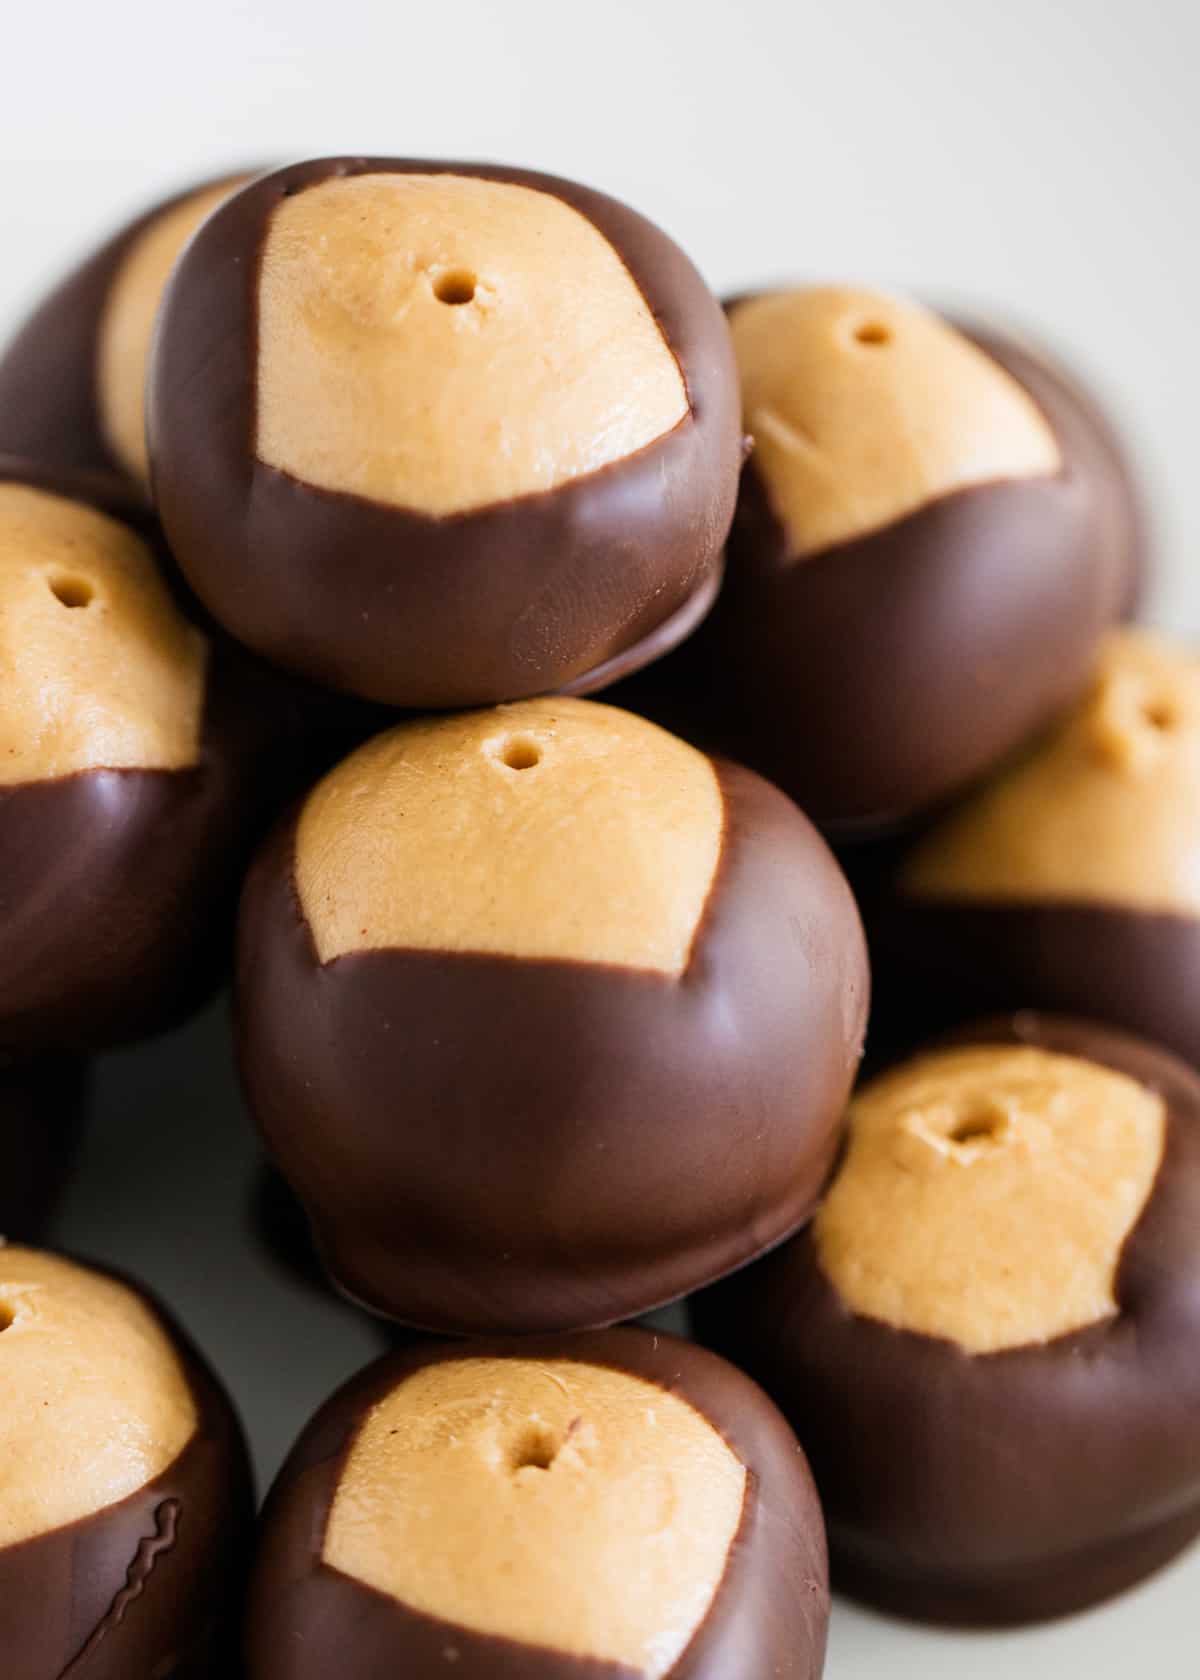 Buckeyes stacked on top of each other on a white plate.